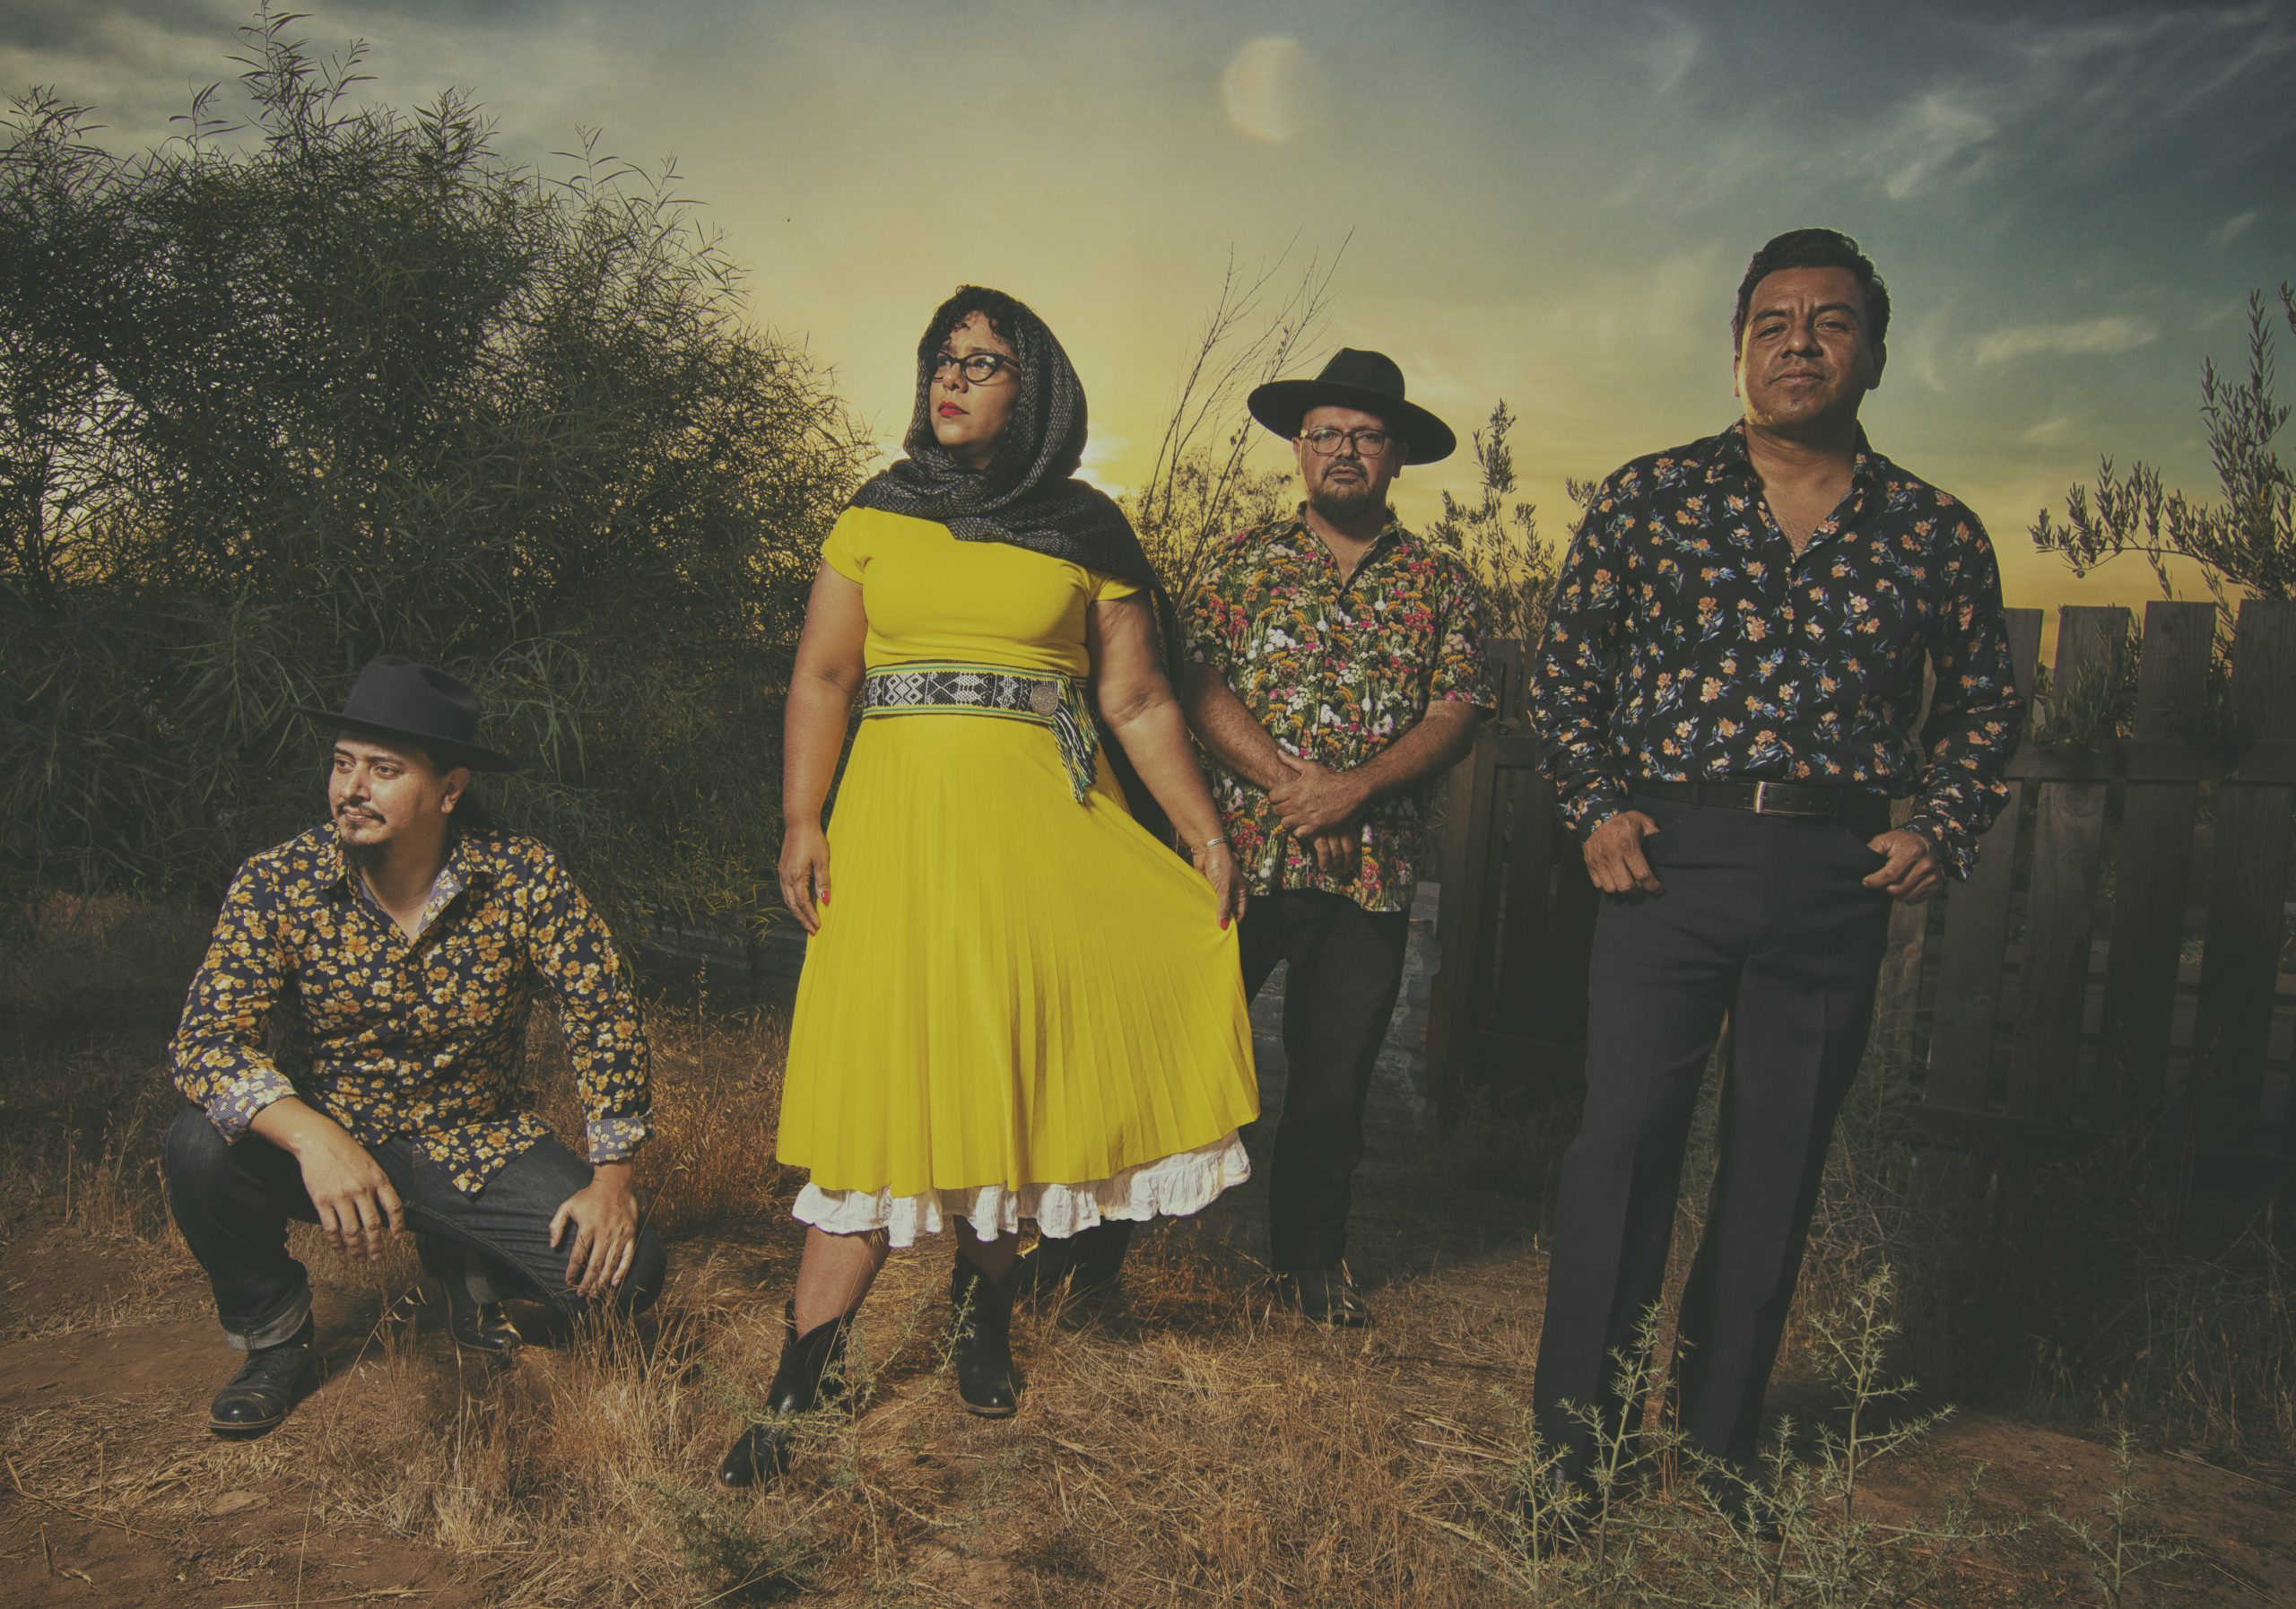 La Santa Cecilia group posing with confidence in a rustic outdoor setting at dusk, exuding a vintage vibe.